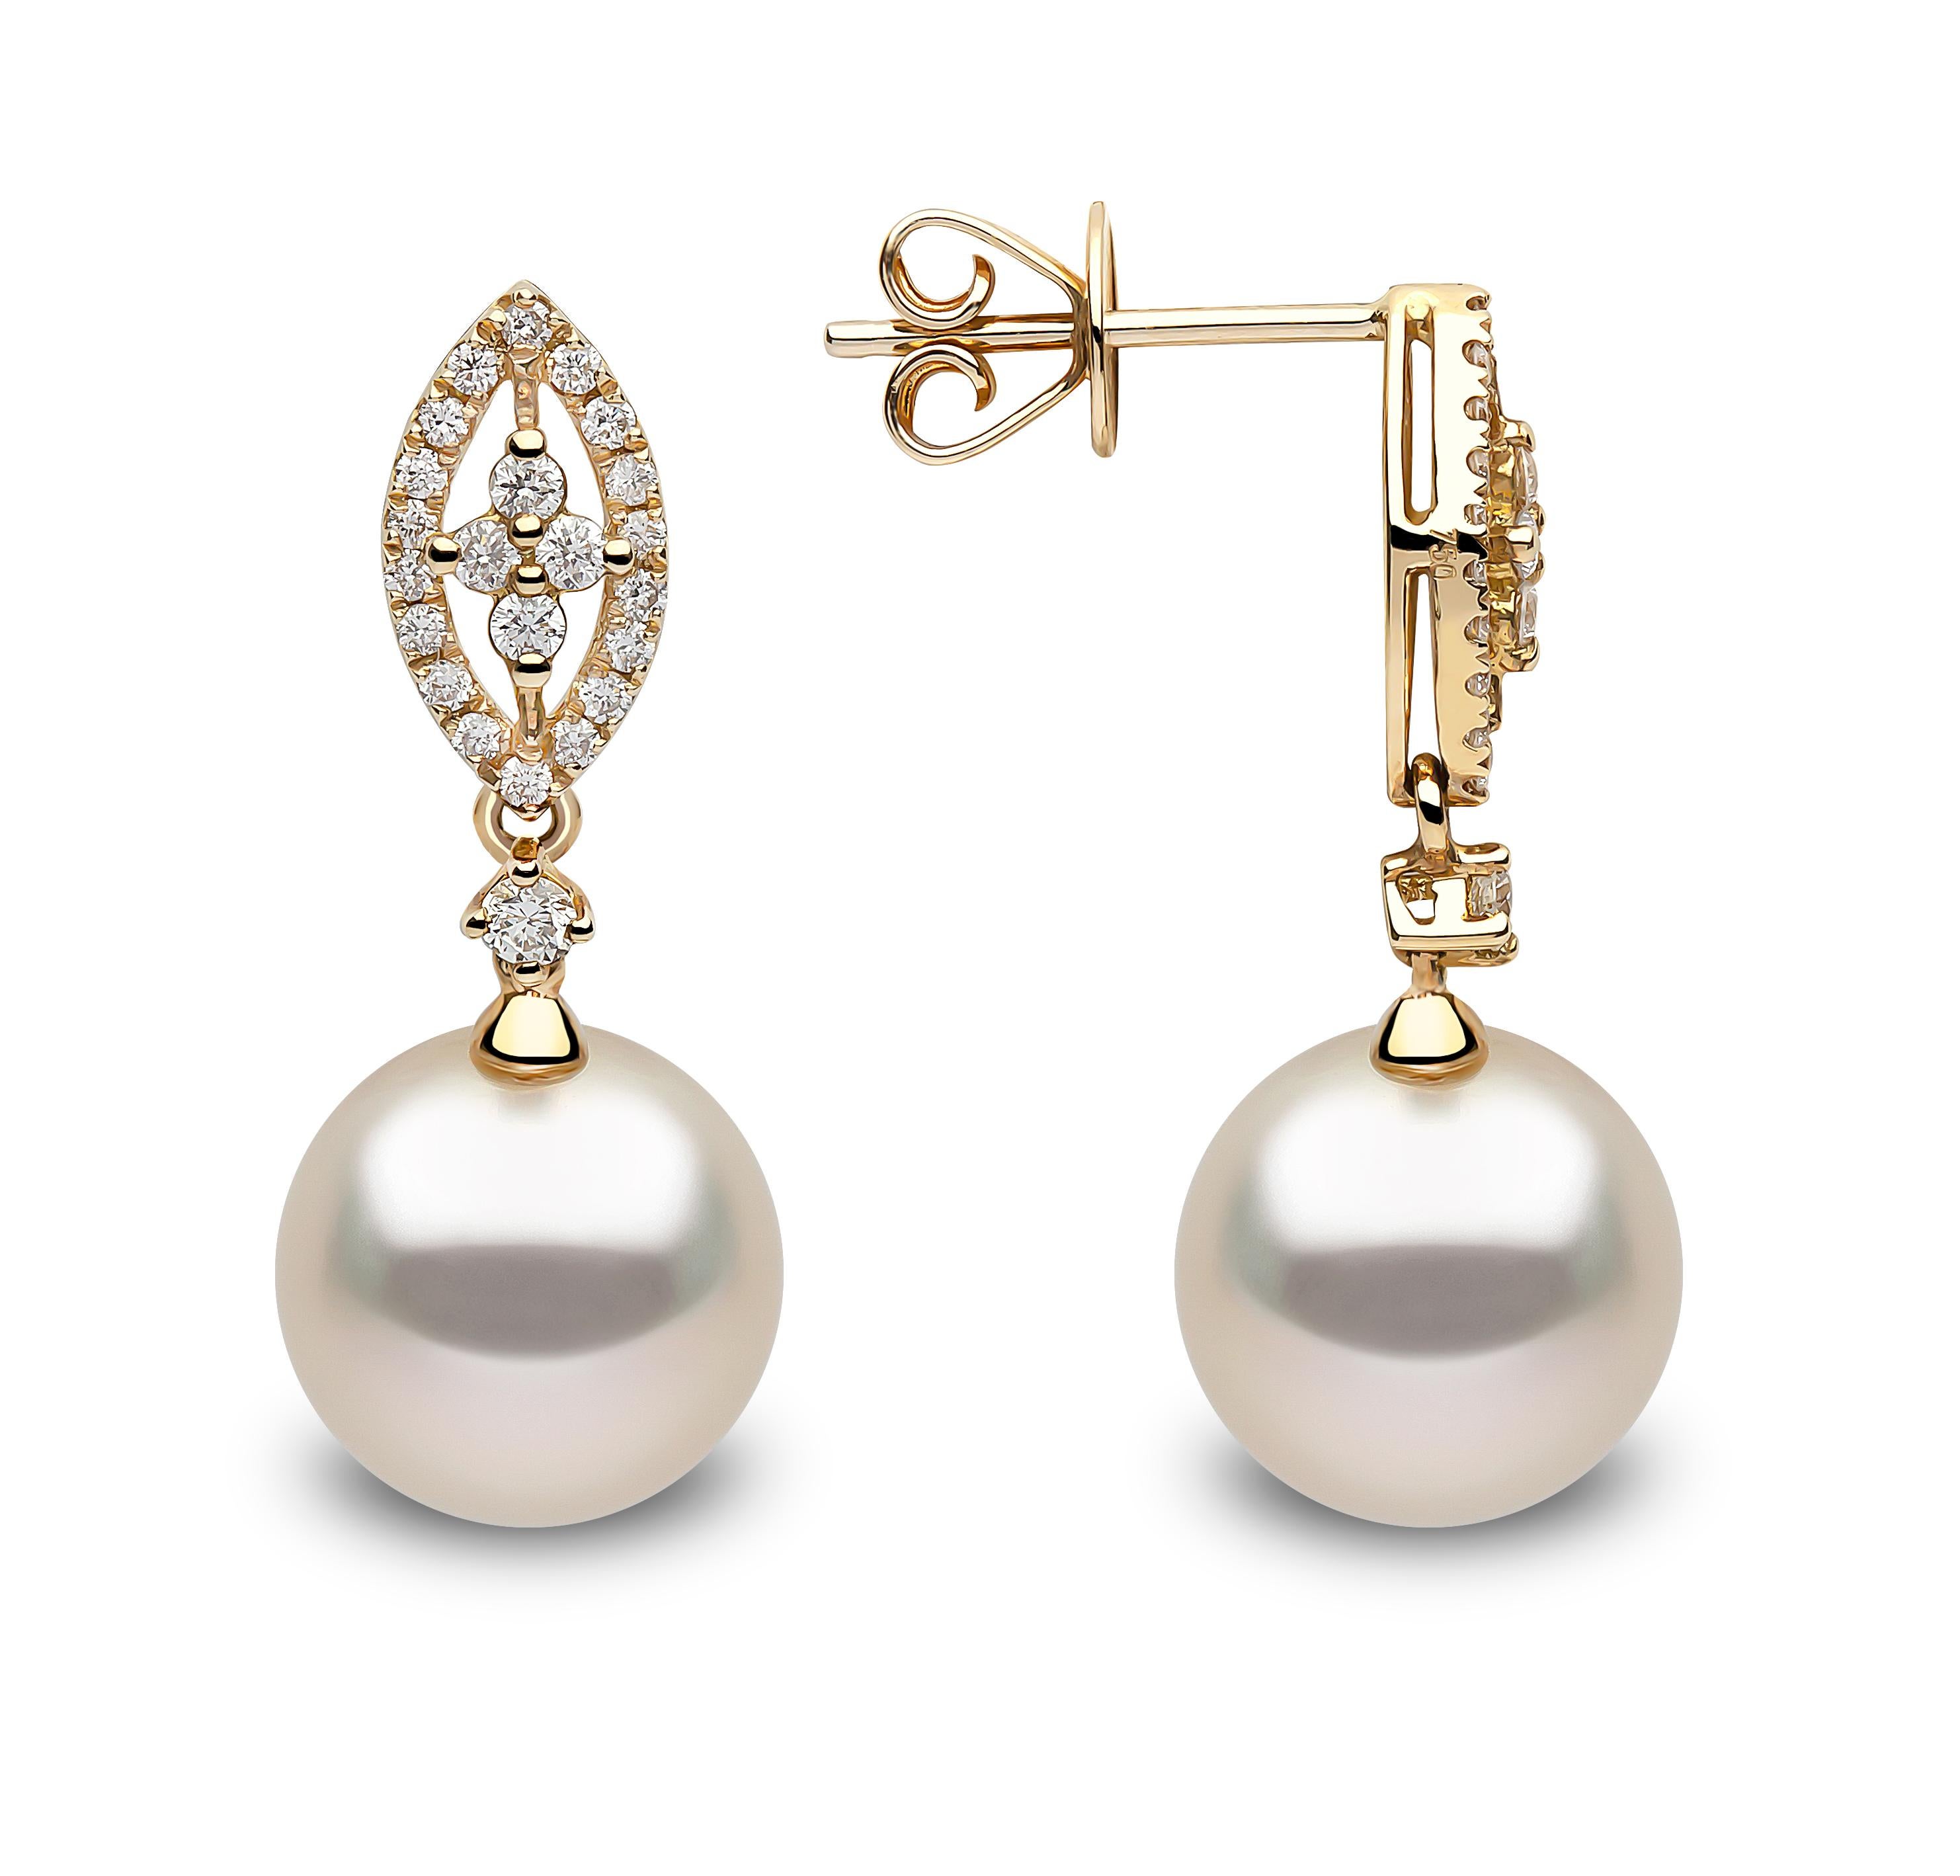 These charming earrings by Yoko London feature radiant South Sea pearls at the centre of their design. Masterfully crafted in 18 Karat yellow gold with an intricate arrangement of diamonds, these timeless earrings have been expertly designed in our